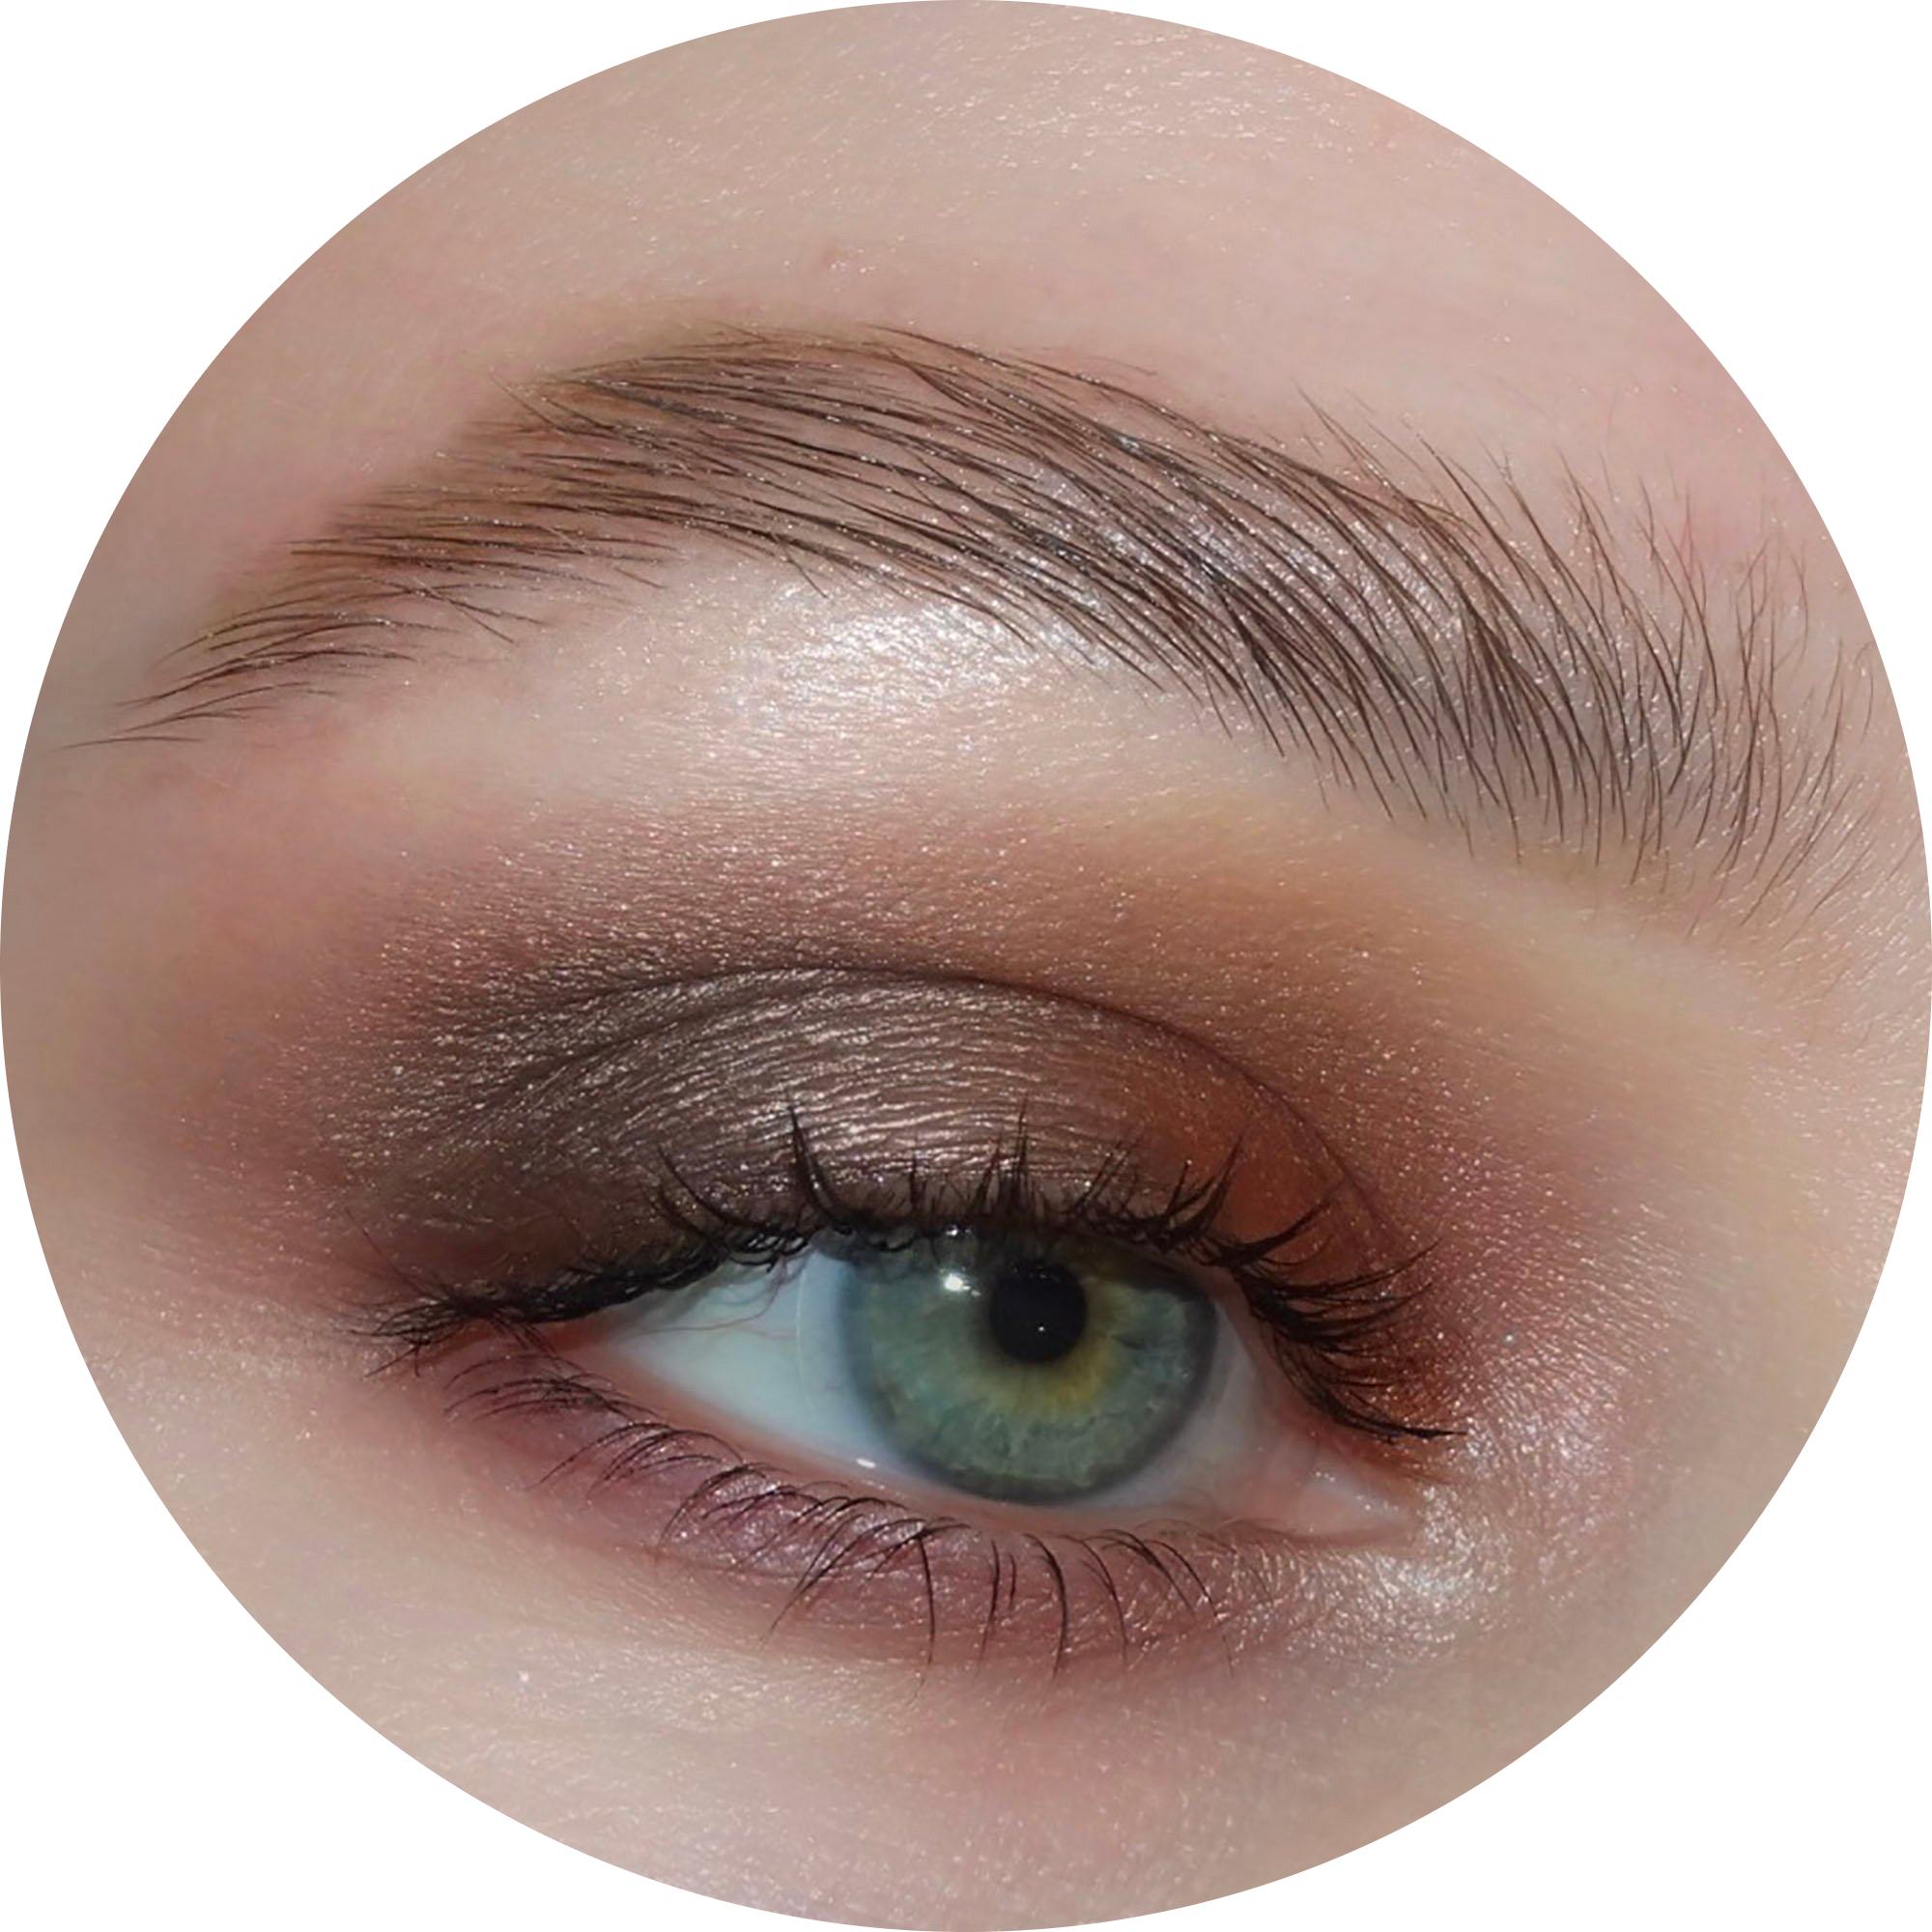 Smoke 'n roses palette NudeFace Chile